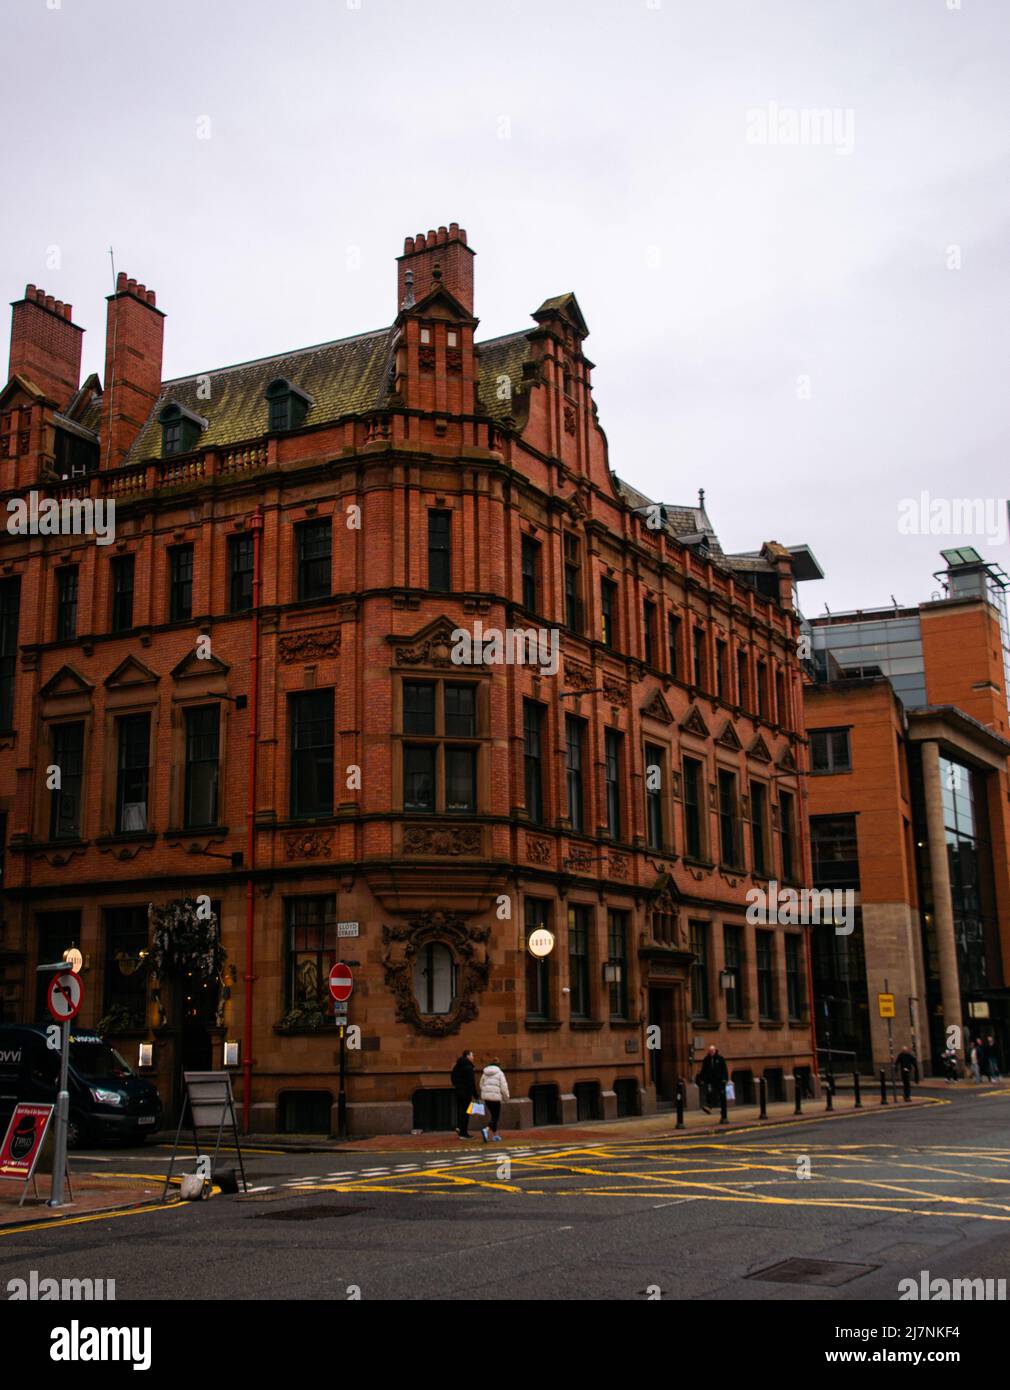 Elliot House, a Grade-II Listed Building, located in Deansgate, Manchester, Greater Manchester, United Kingdom. Stock Photo